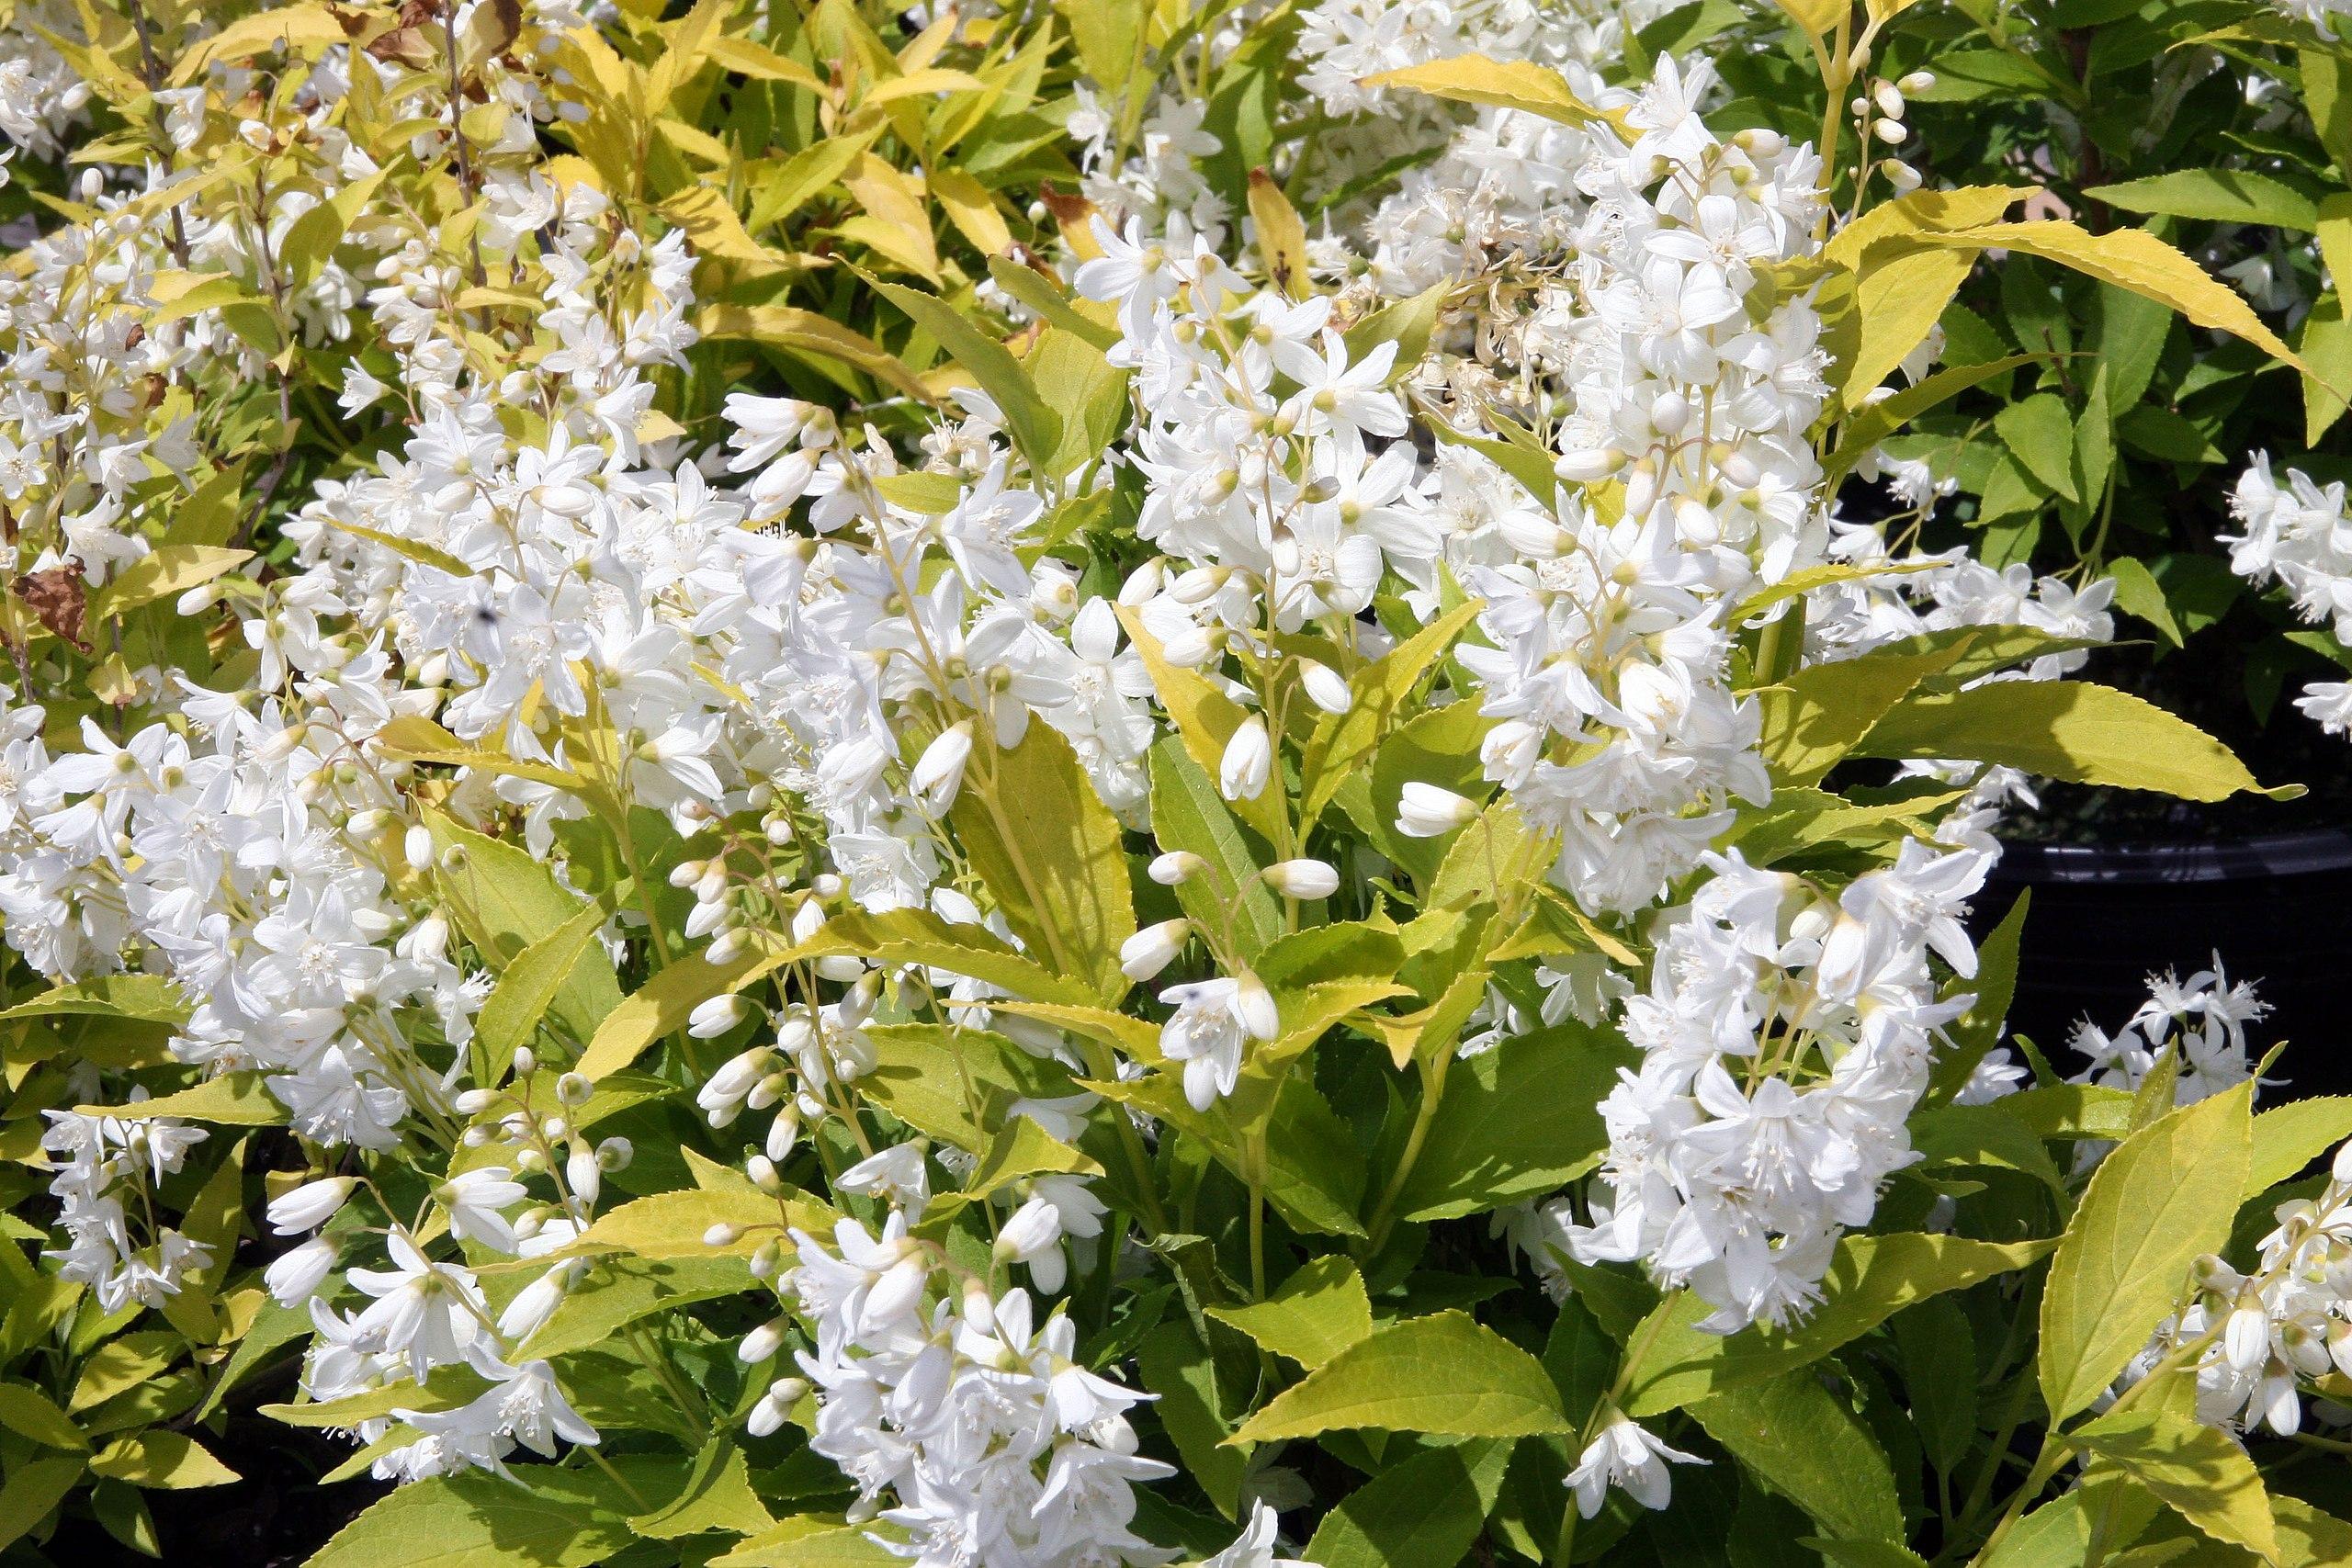 white flowers with white stamens, white buds, lime-yellow leaves and stems